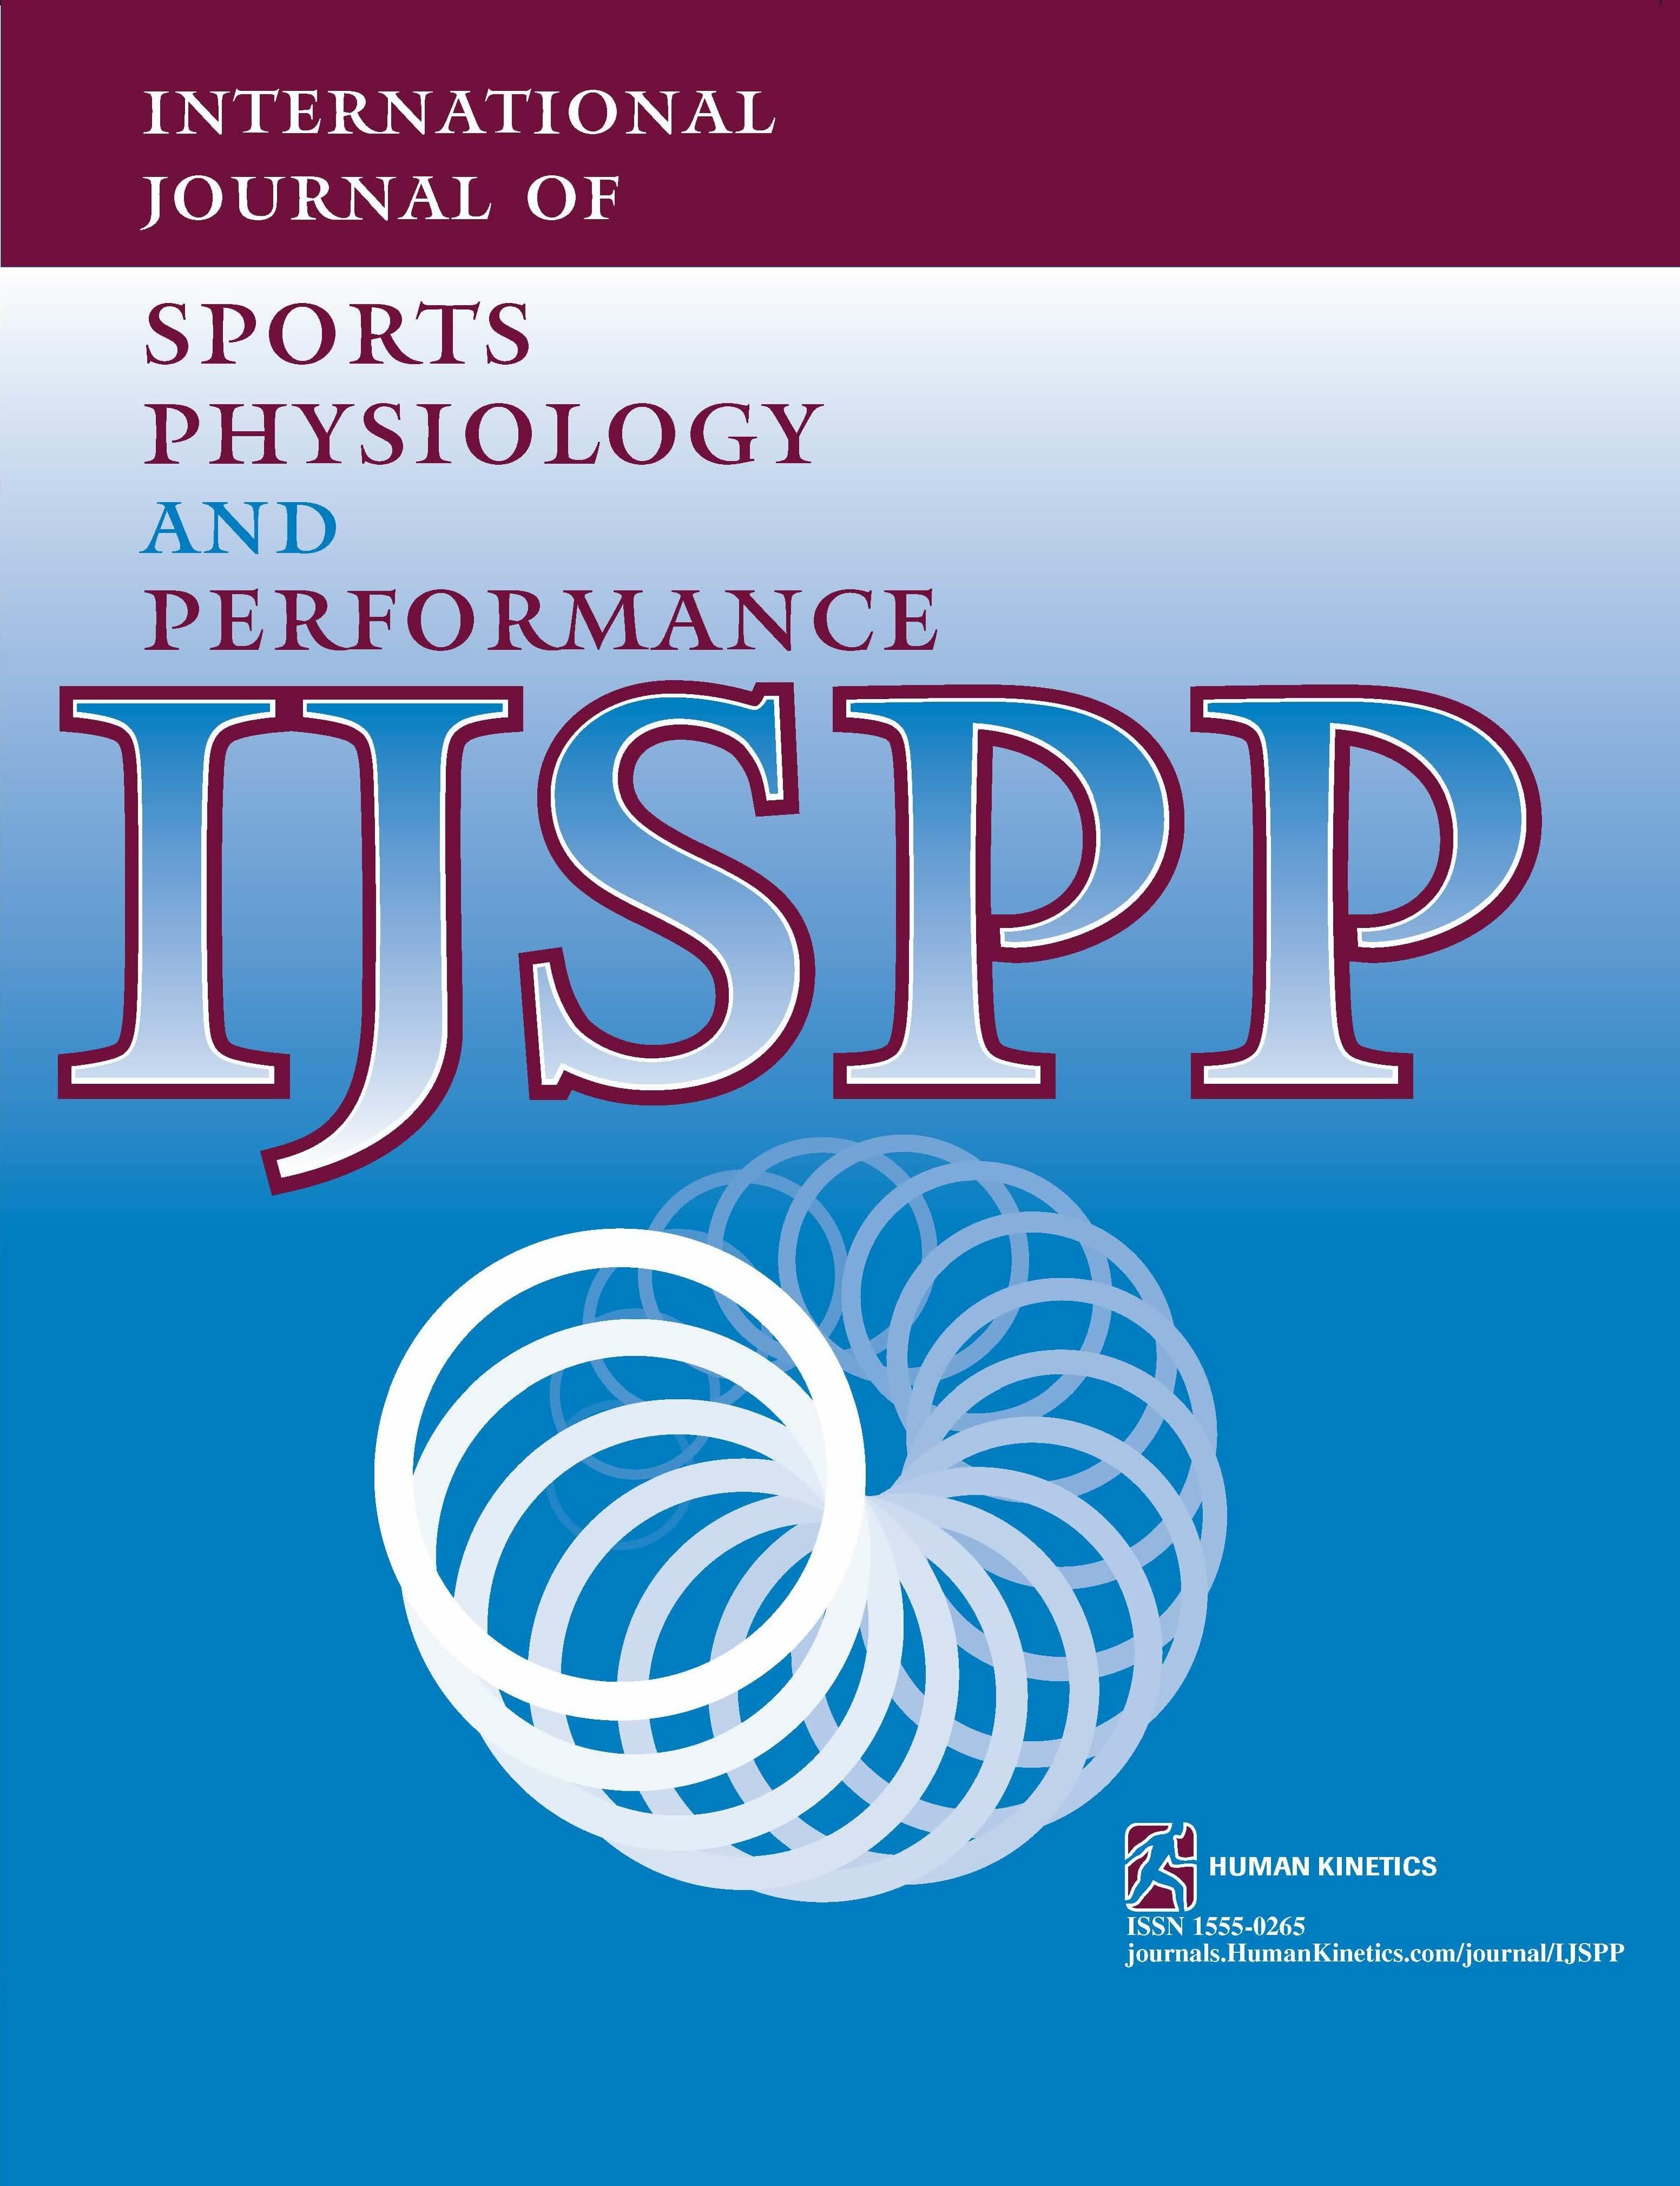 Effects of In-Exercise Carbohydrate Supplementation on Prolonged High-Intensity Exercise Performance in Oral Contraceptive Users